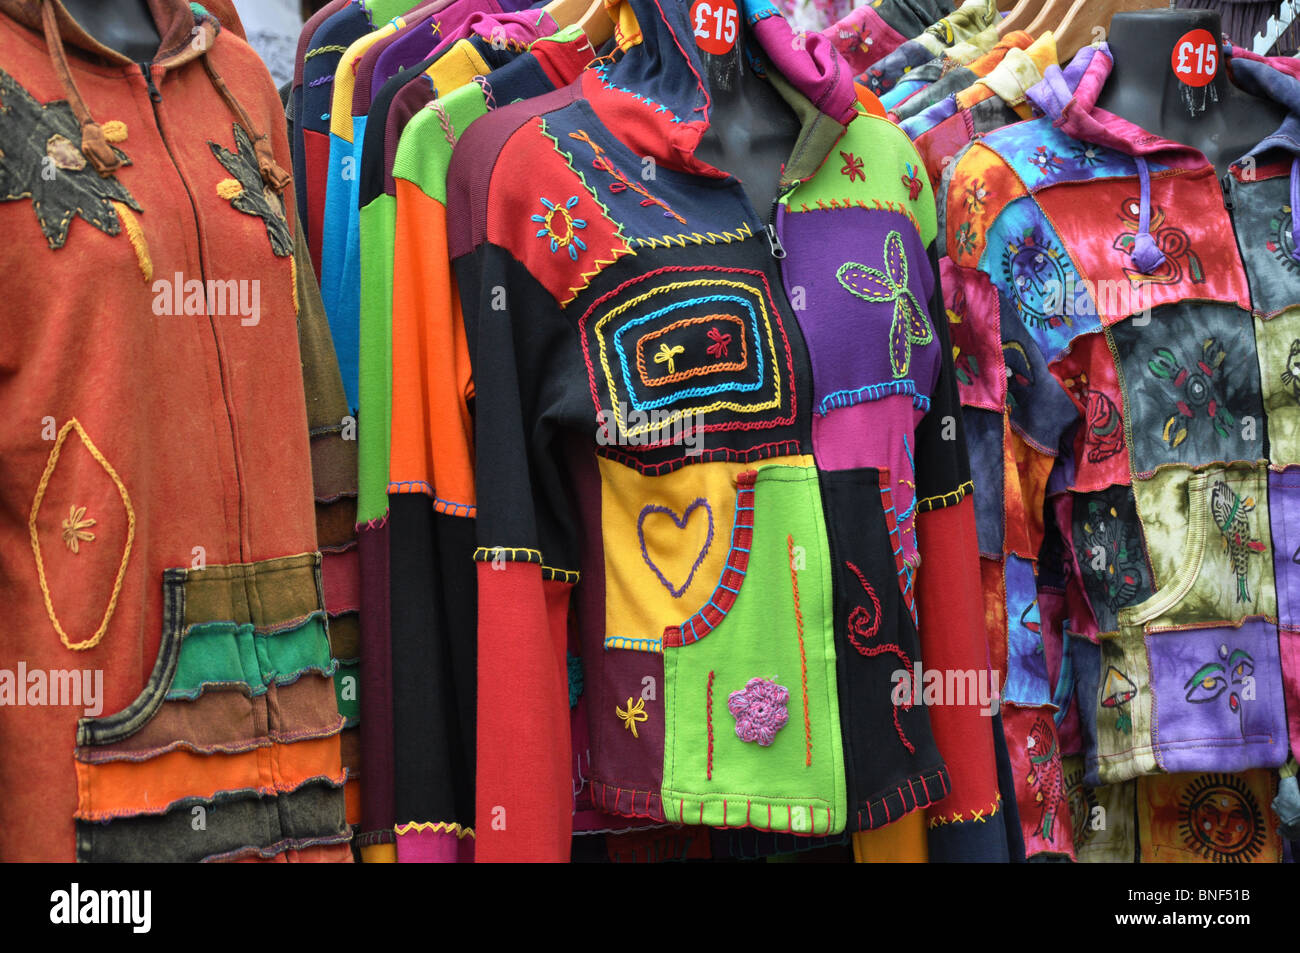 Colourful shirts on sale at Guilfest music festival Stock Photo